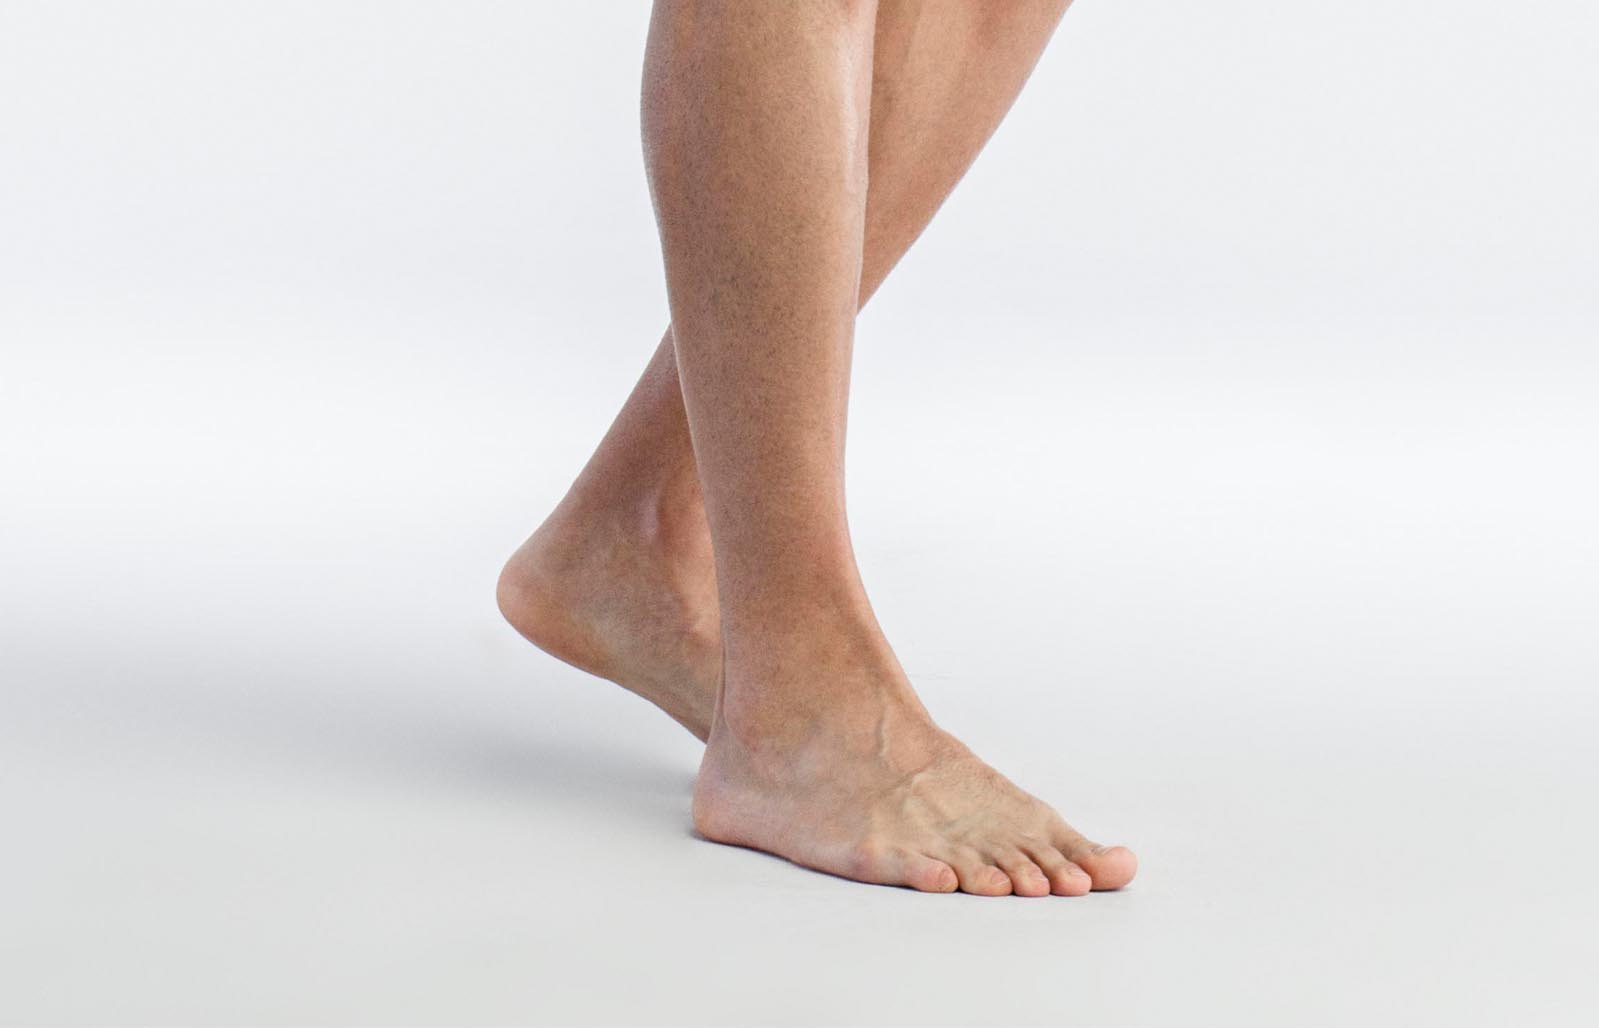 Laser Toenail Fungus Removal: What to Know | RealSelf